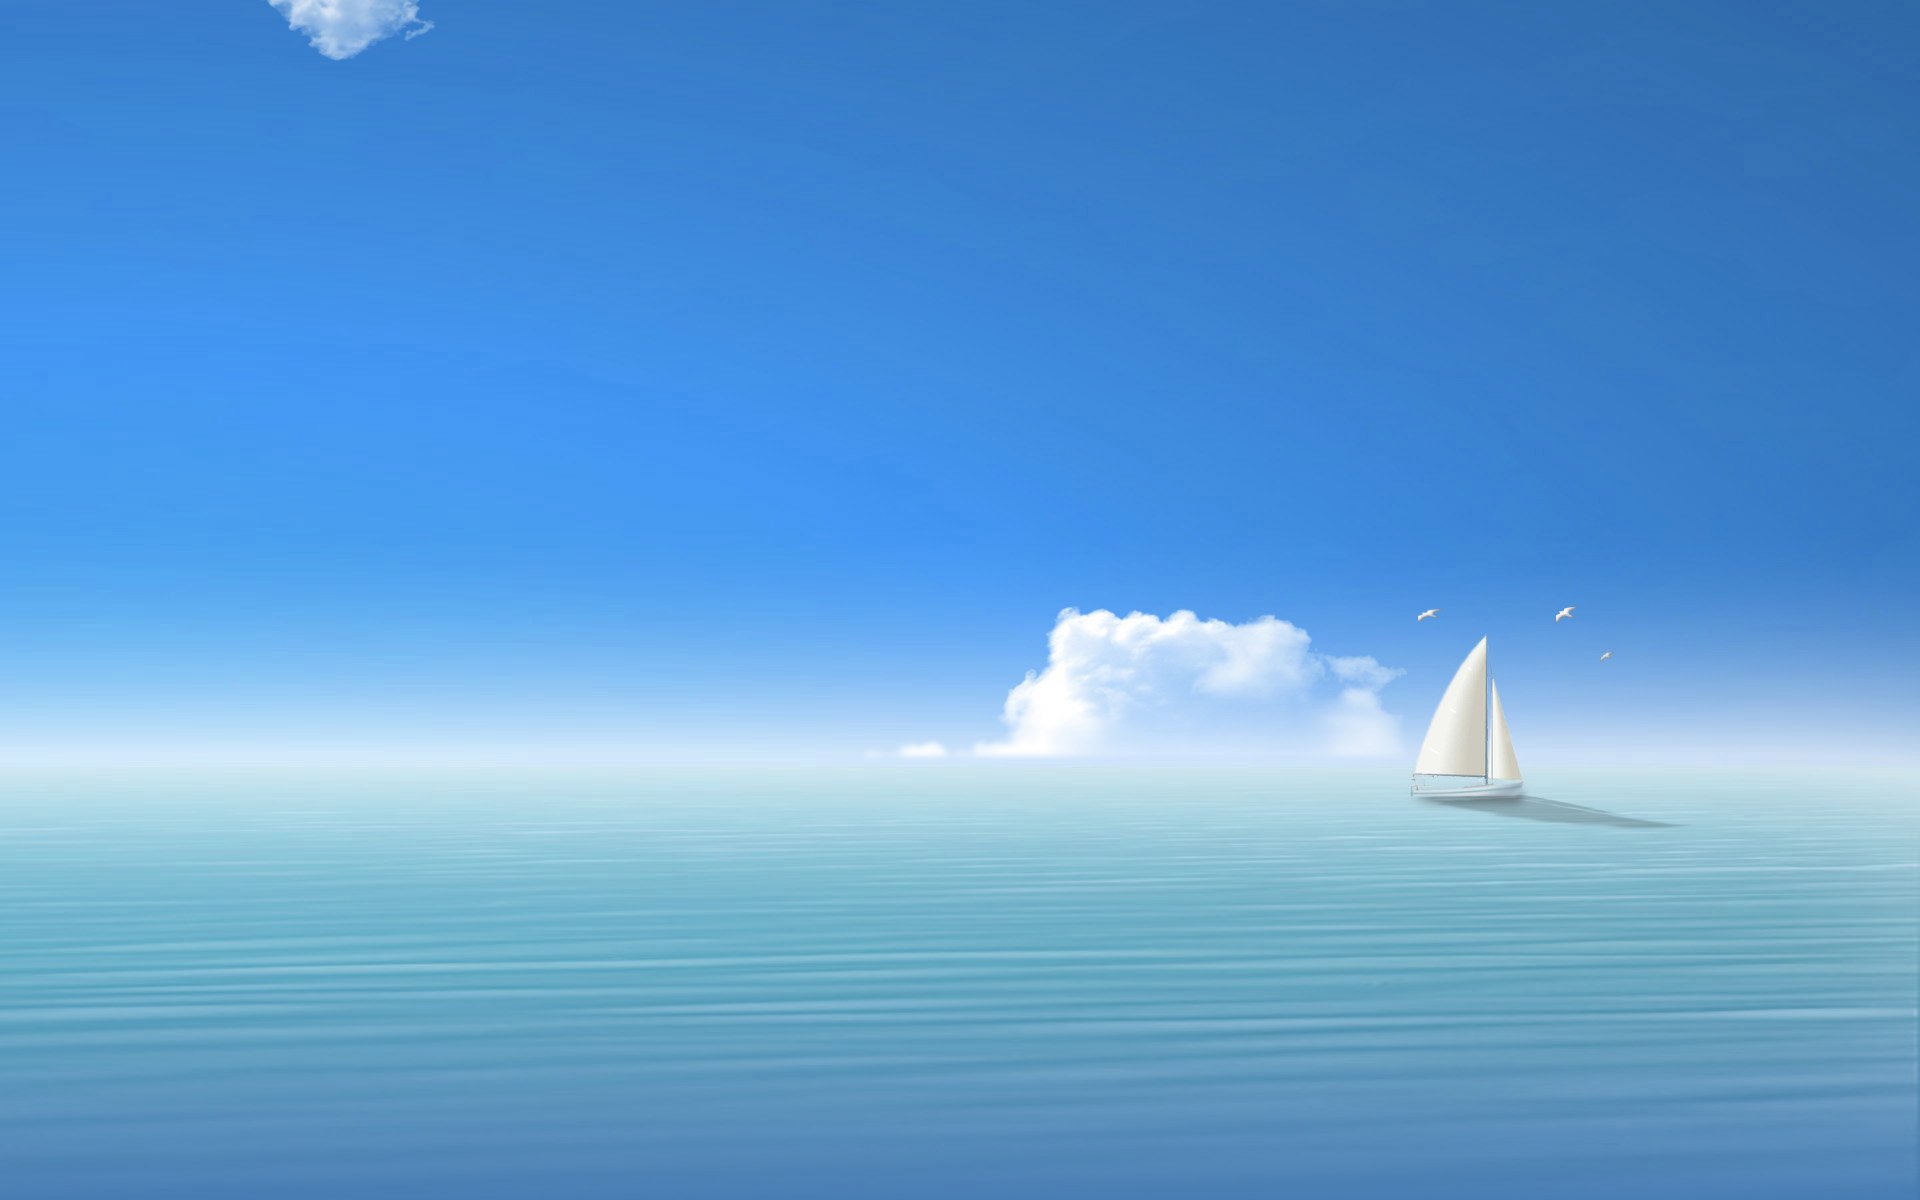 Ocean HD Wallpaper Android Which Is Under The